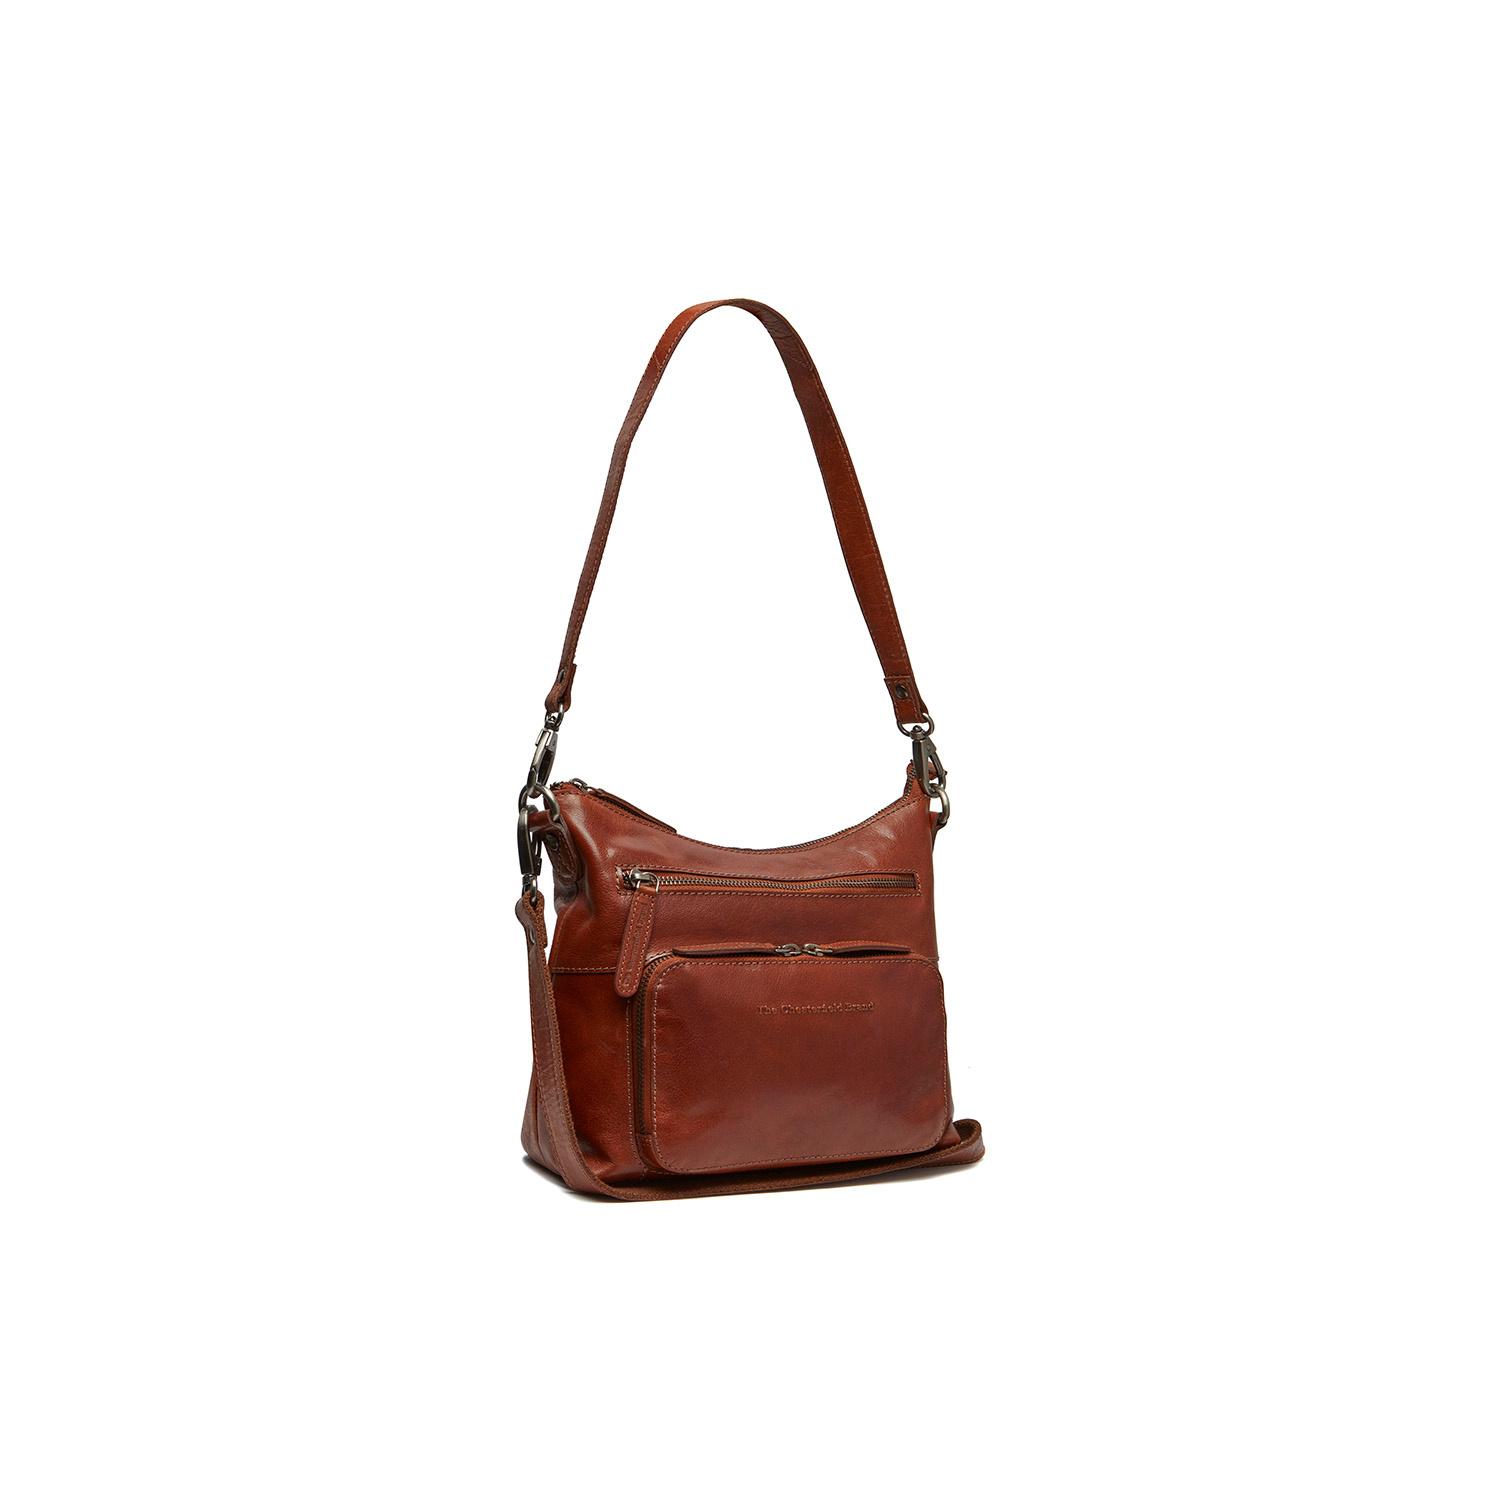 Leather Shoulder Bag Cognac Tula - The Chesterfield Brand